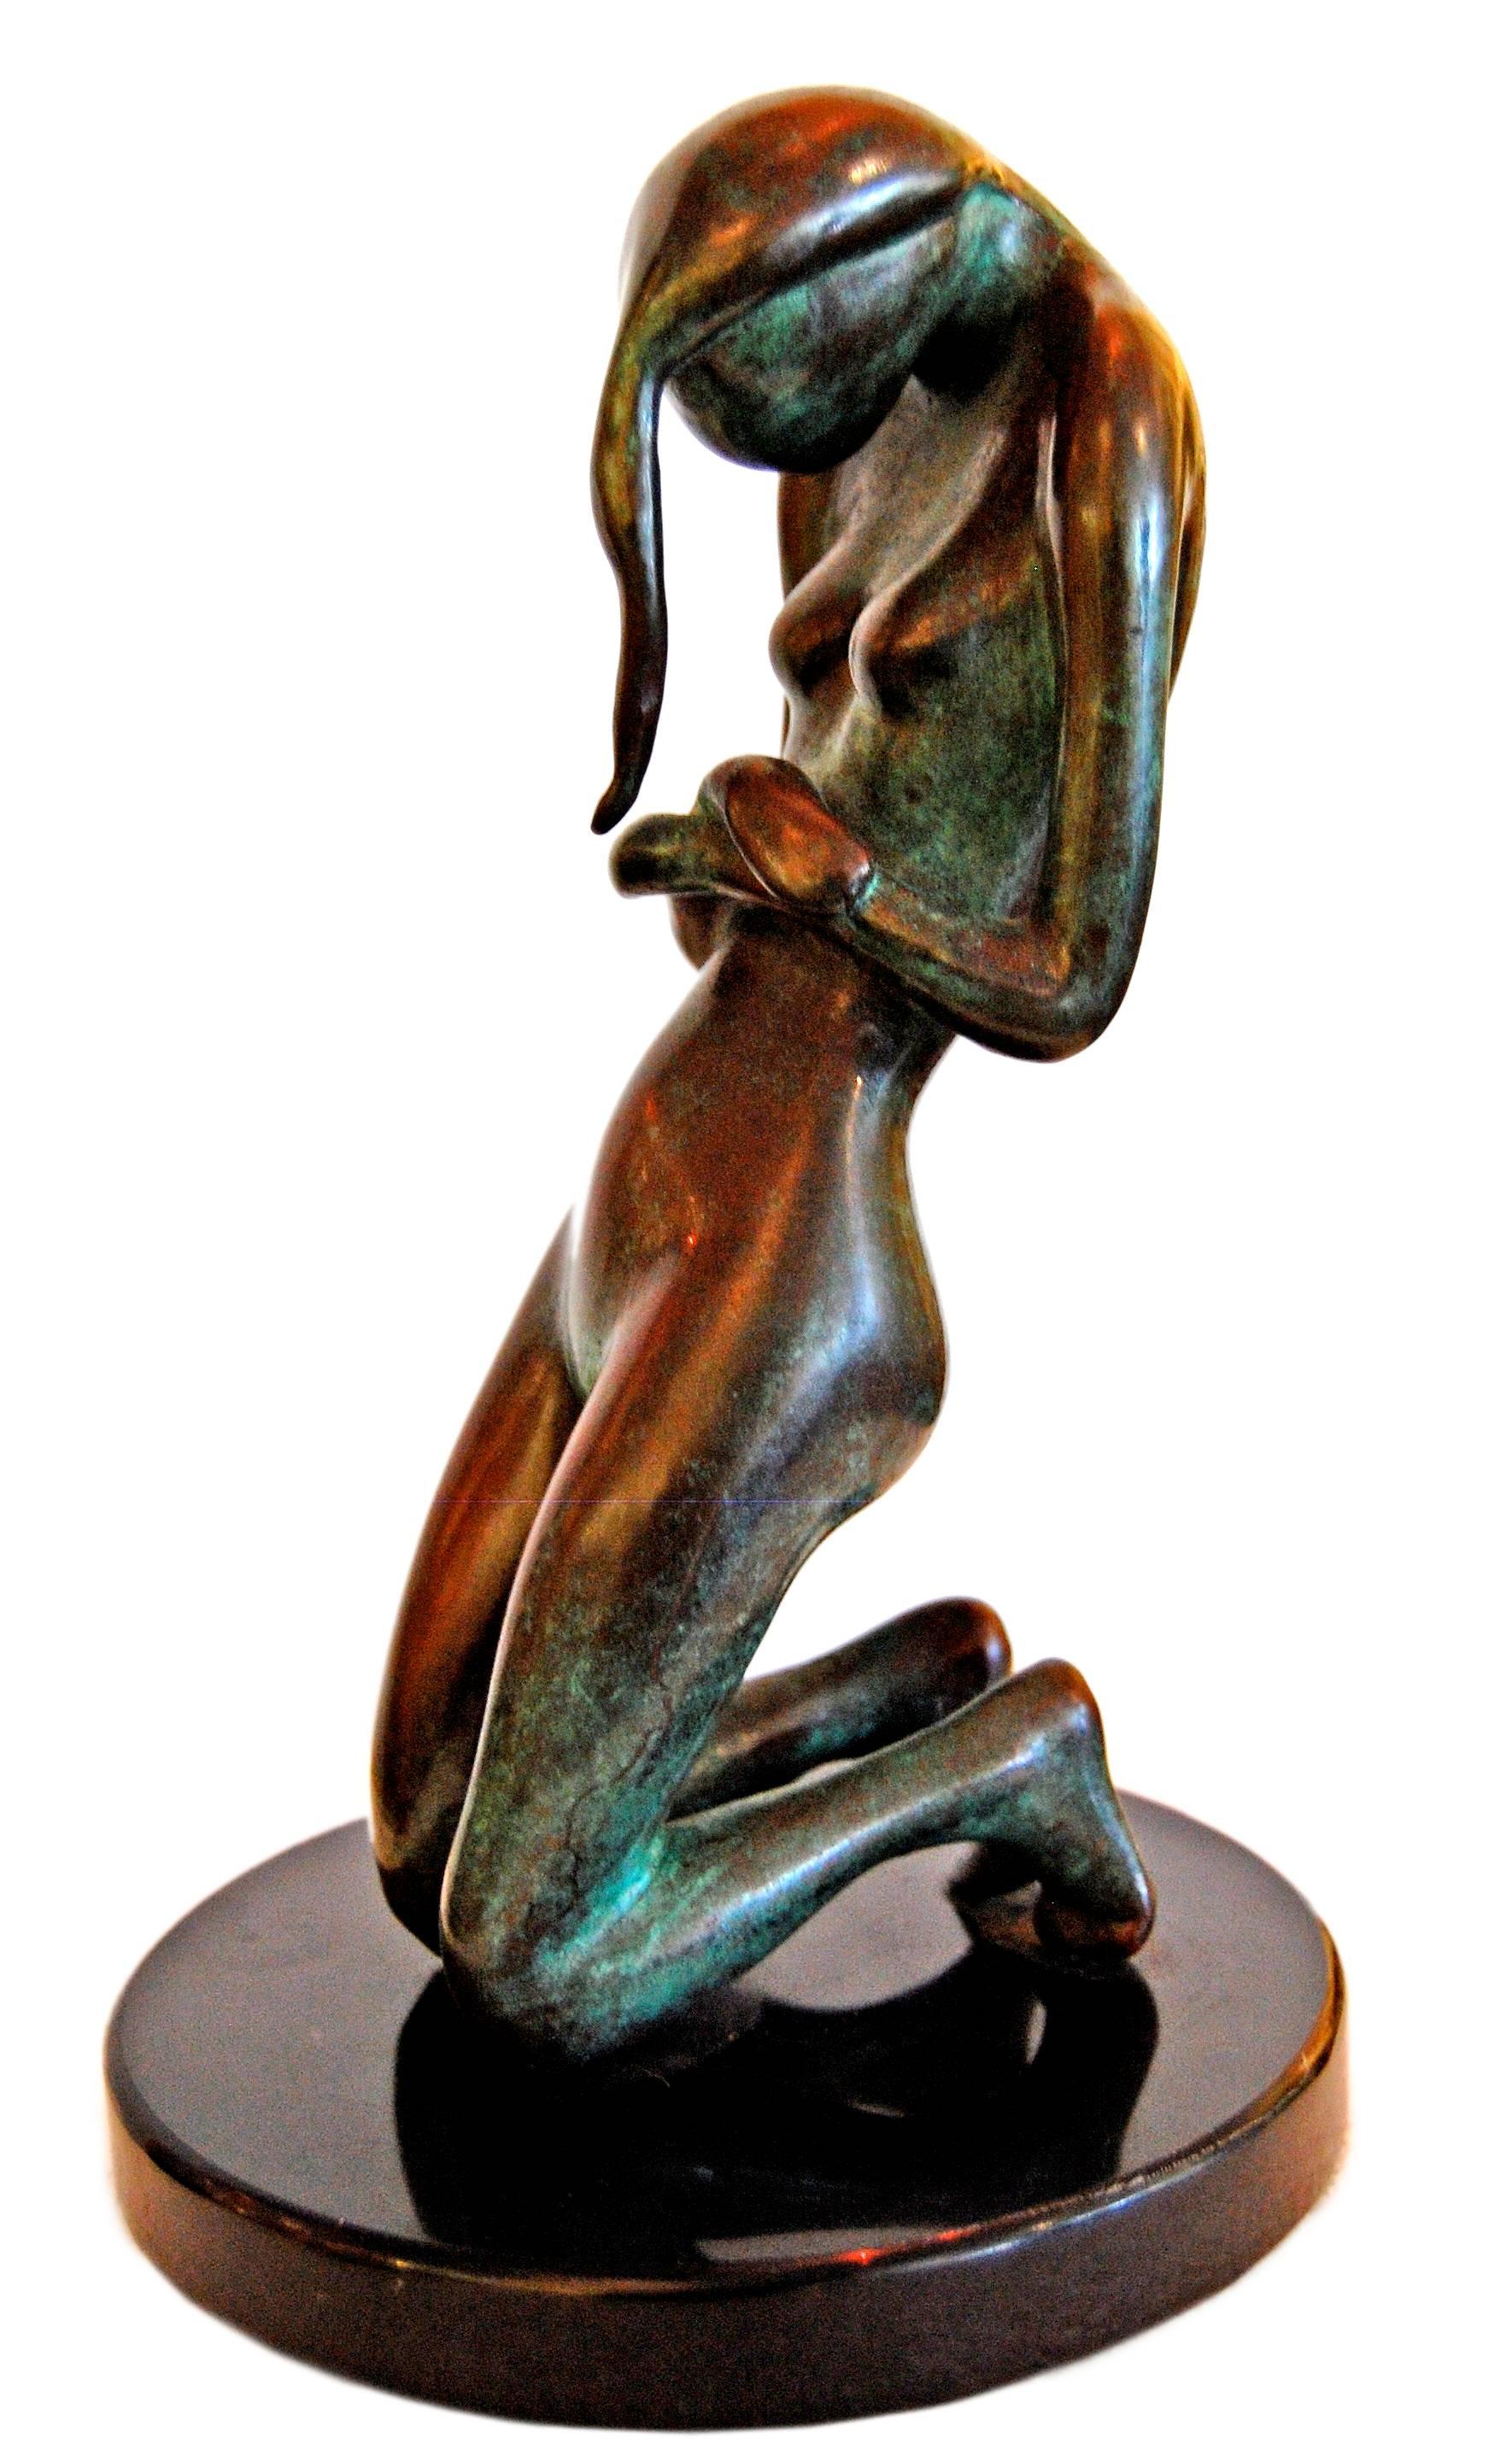 signed Frantzke; TWO nude sculptures stamped with “W.A.R 2/100”; bronze - Sculpture by Unknown